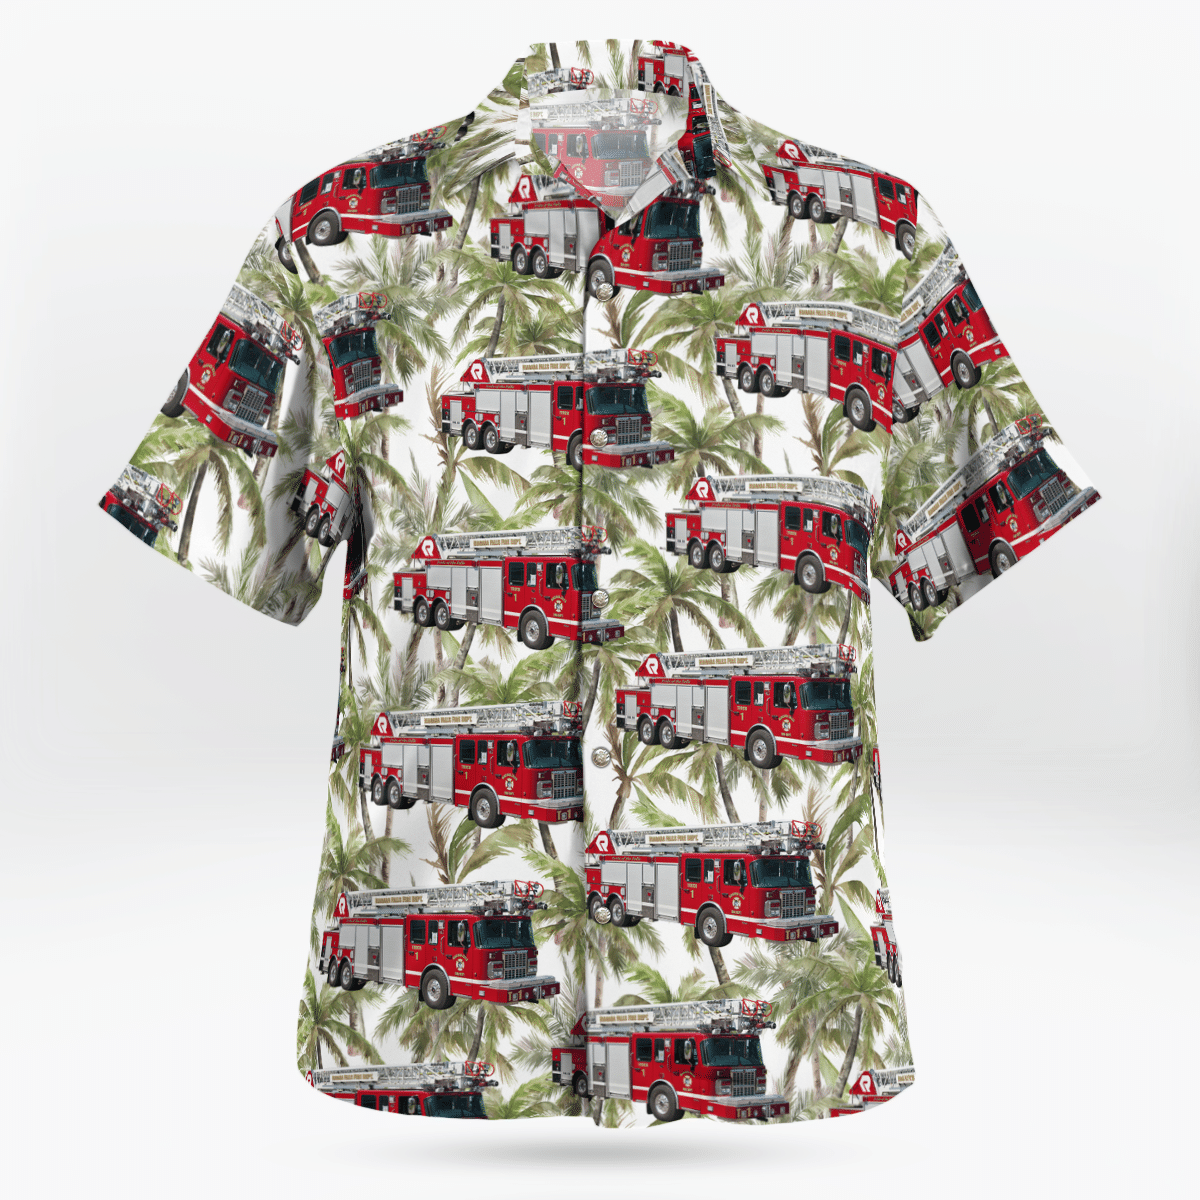 Hawaiian shirts never go out of style 89